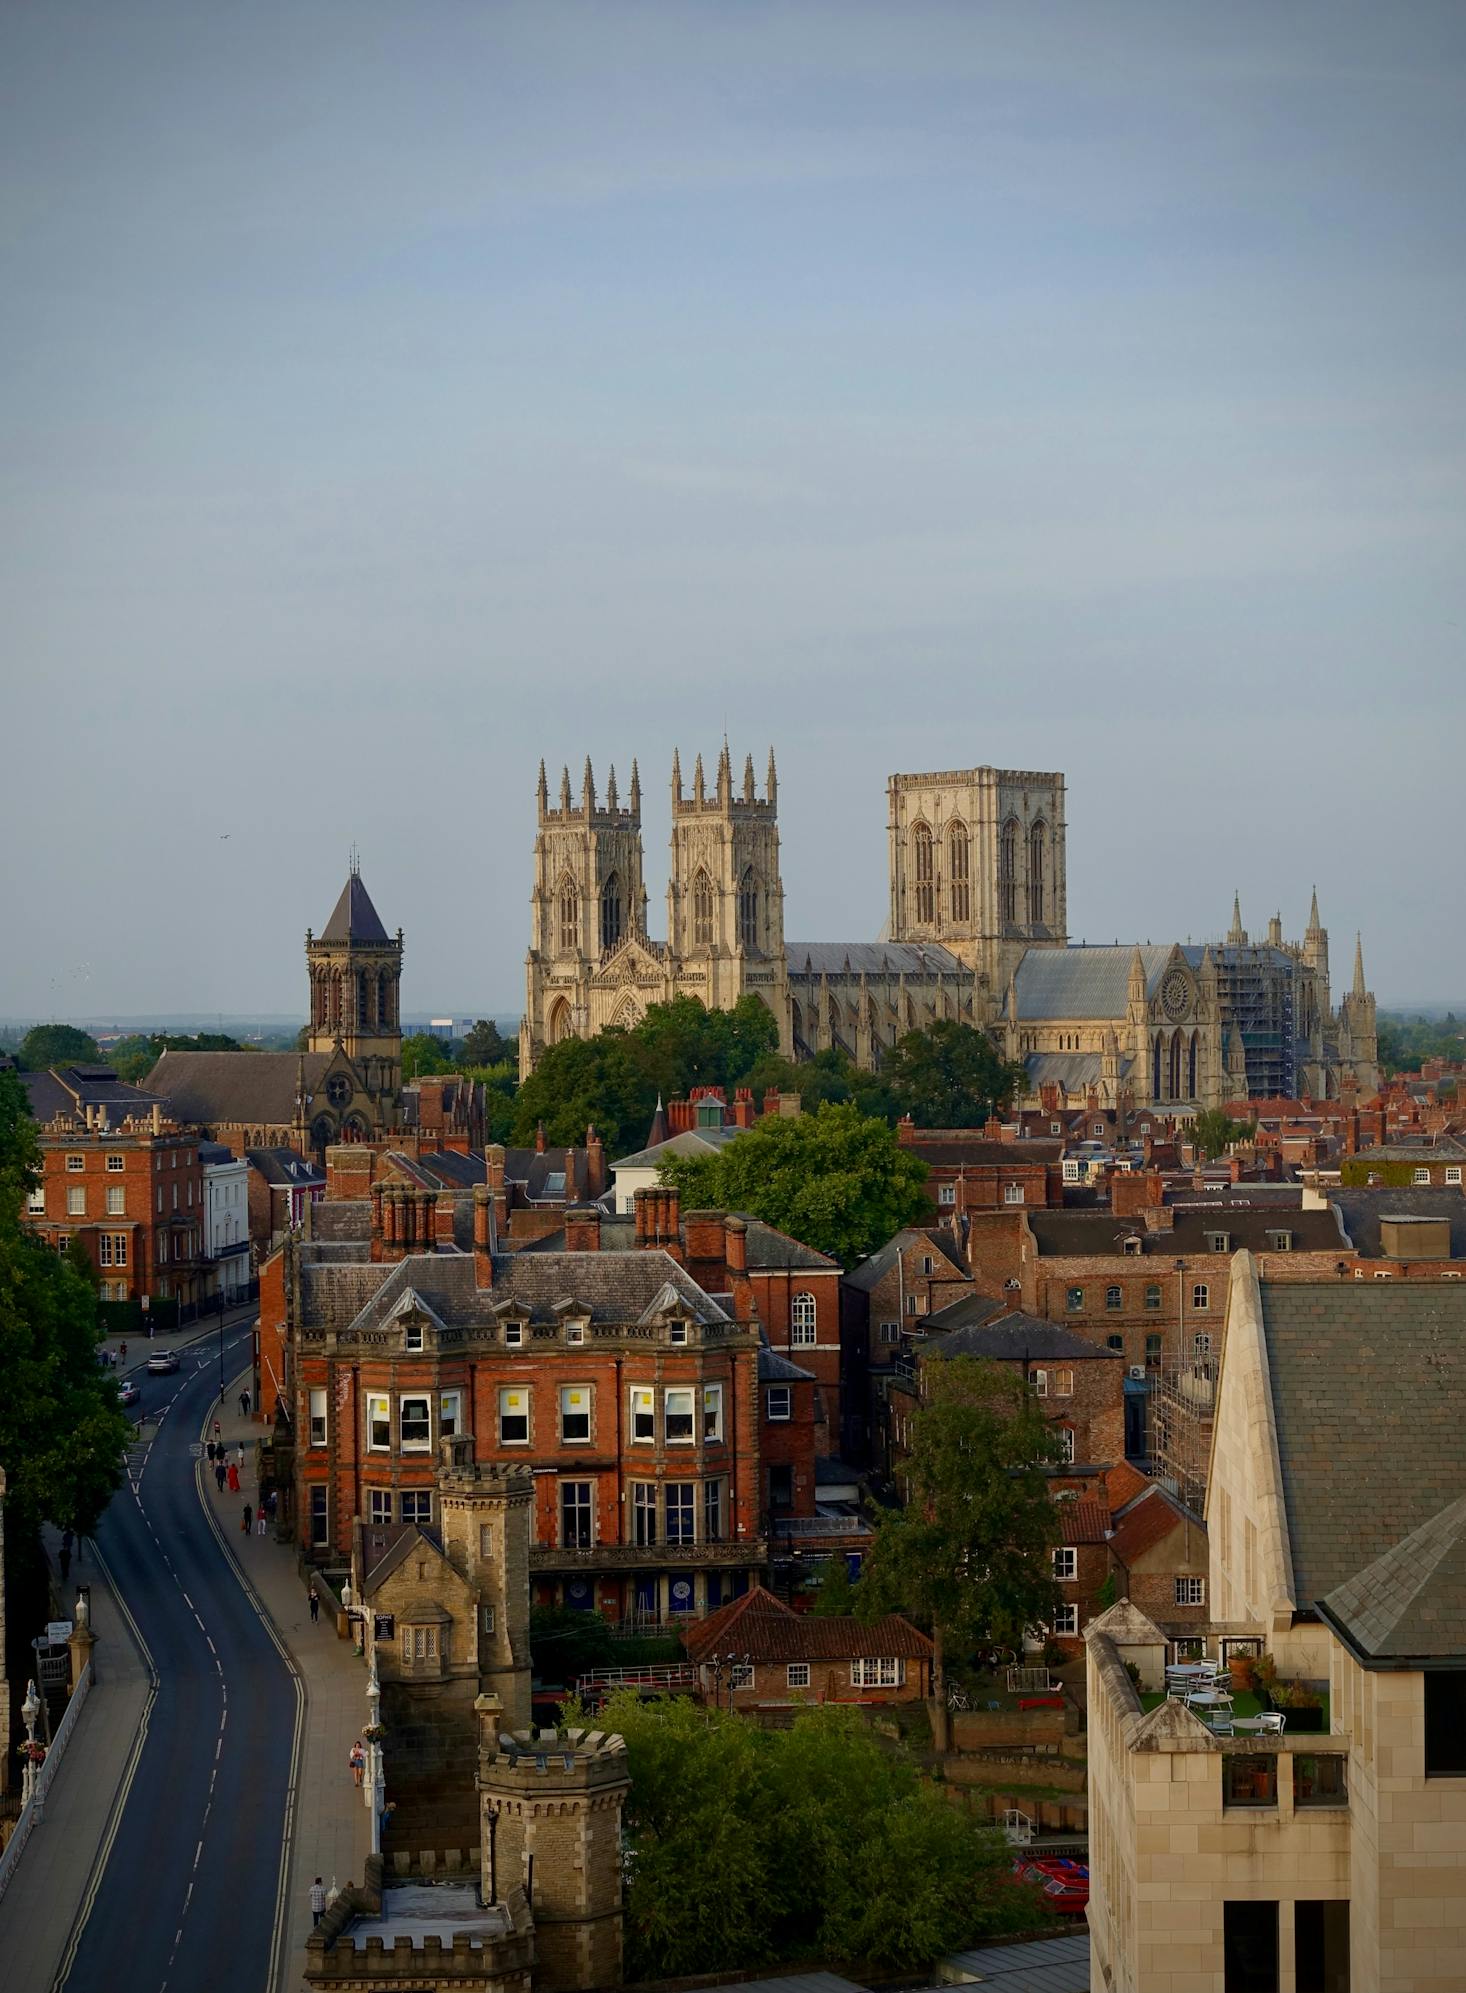 Distance view of York Minster